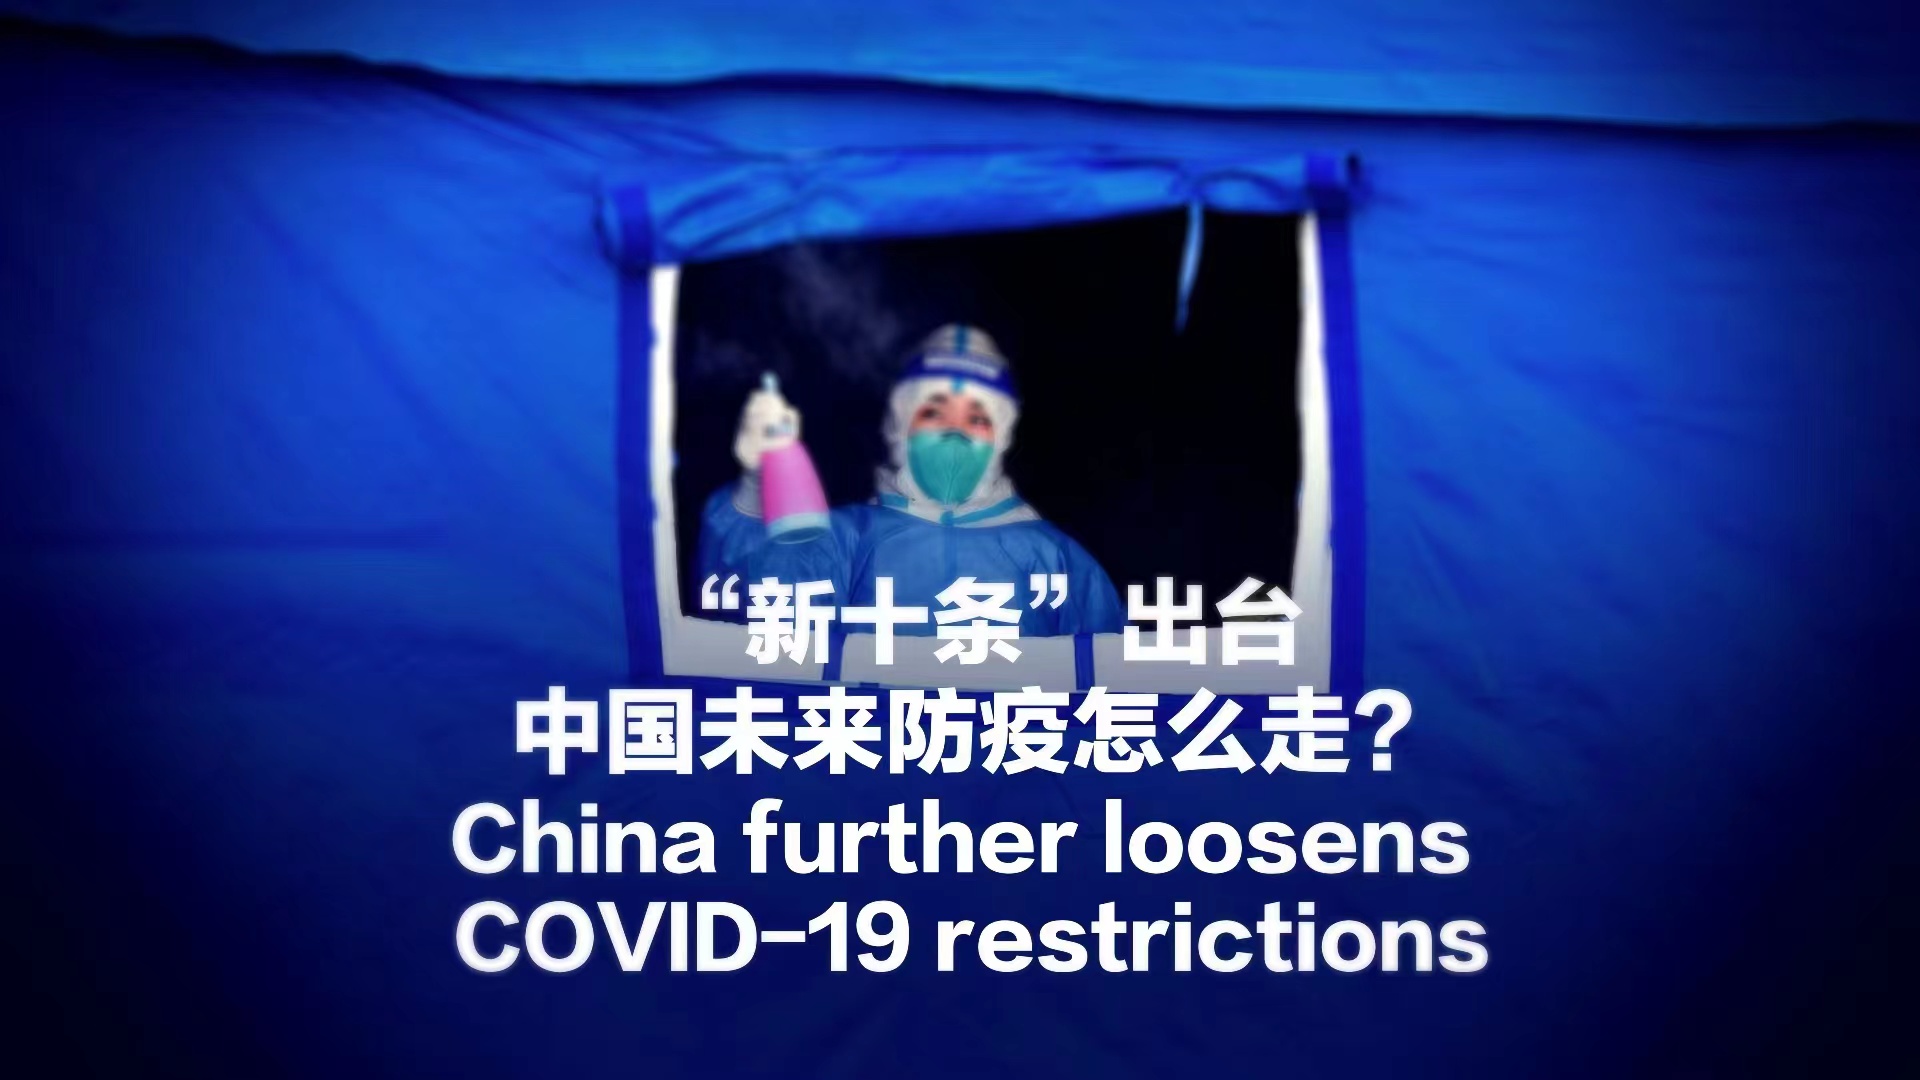 Watch: China further loosens COVID-19 restrictions